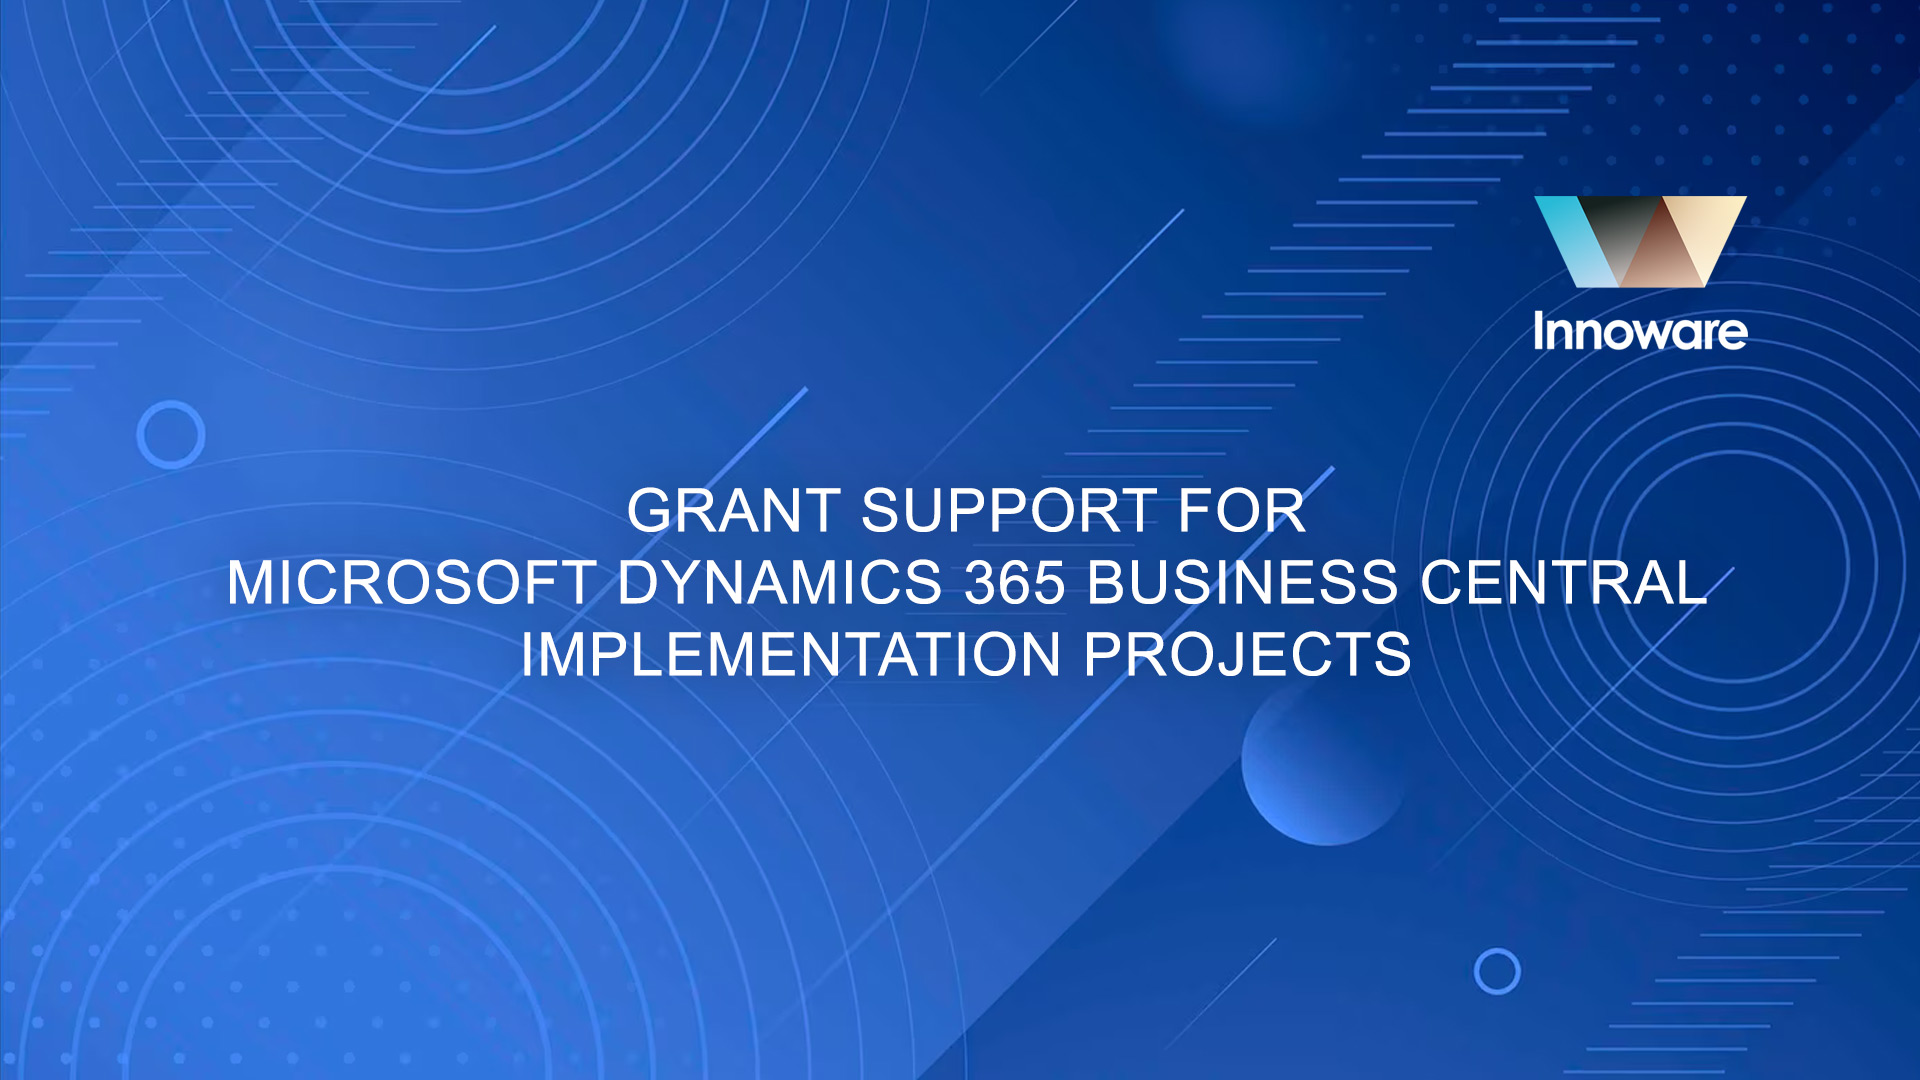 Grant support for Microsoft Dynamics 365 Business Central implementation projects from Innoware